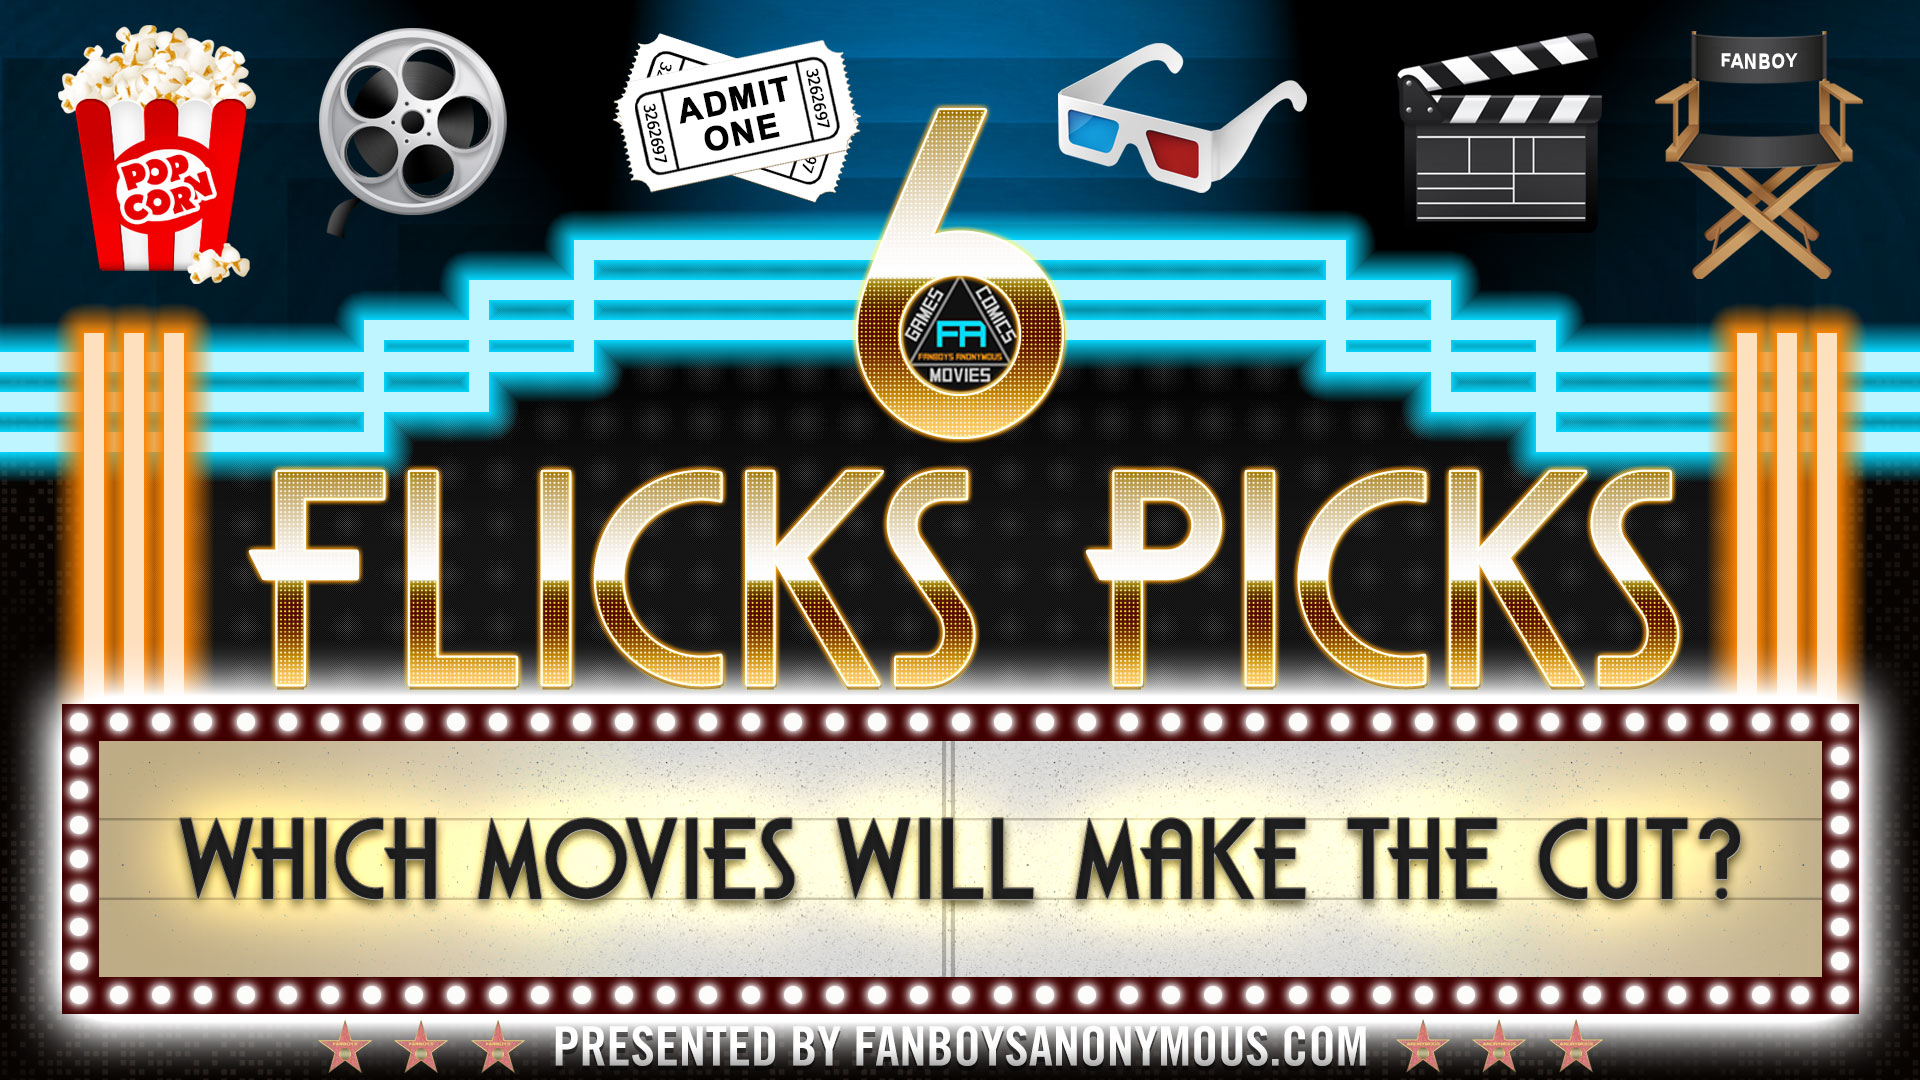 What movies are coming out January 2022 6 Flicks Picks